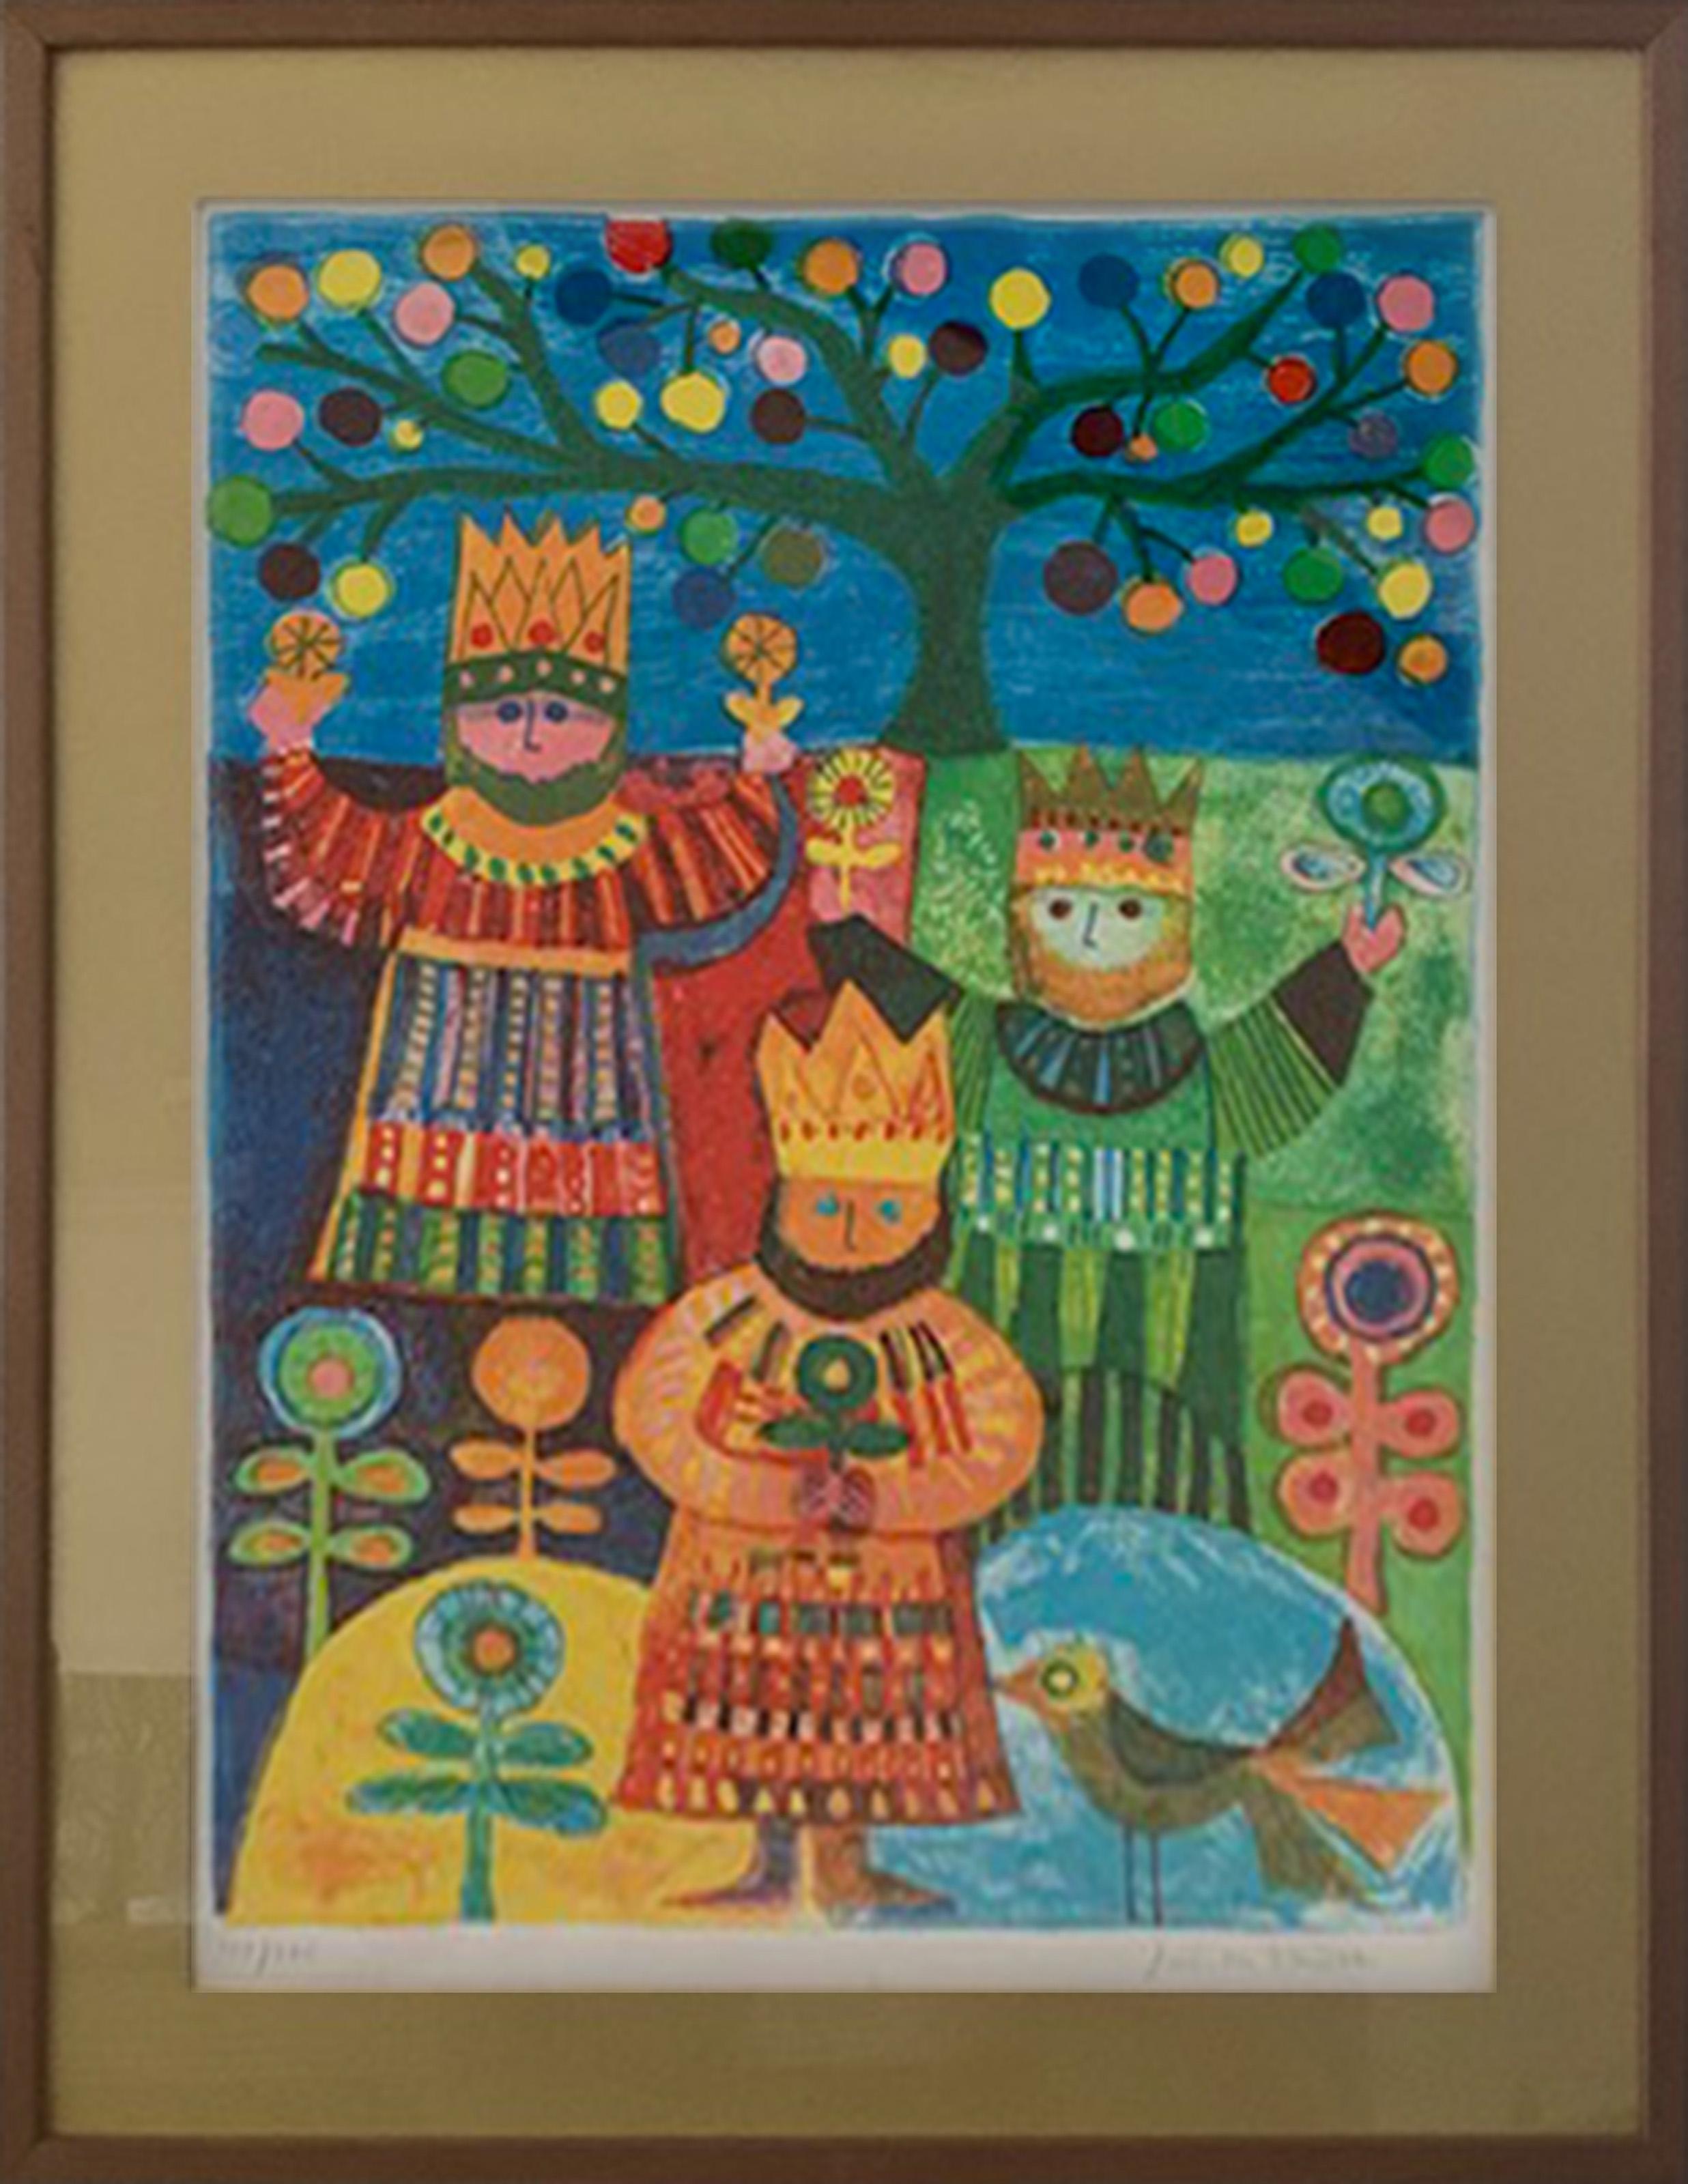 Judith Bledsoe, American (1938 - 2013) -  Three Kings. Year: 1970, Medium: Lithograph, signed and numbered in pencil, Edition: 154/375, Size: 20.5 x 16 in. (52.07 x 40.64 cm), Frame Size: 26.75 x 20.75 inches, Description: A charming multicolor